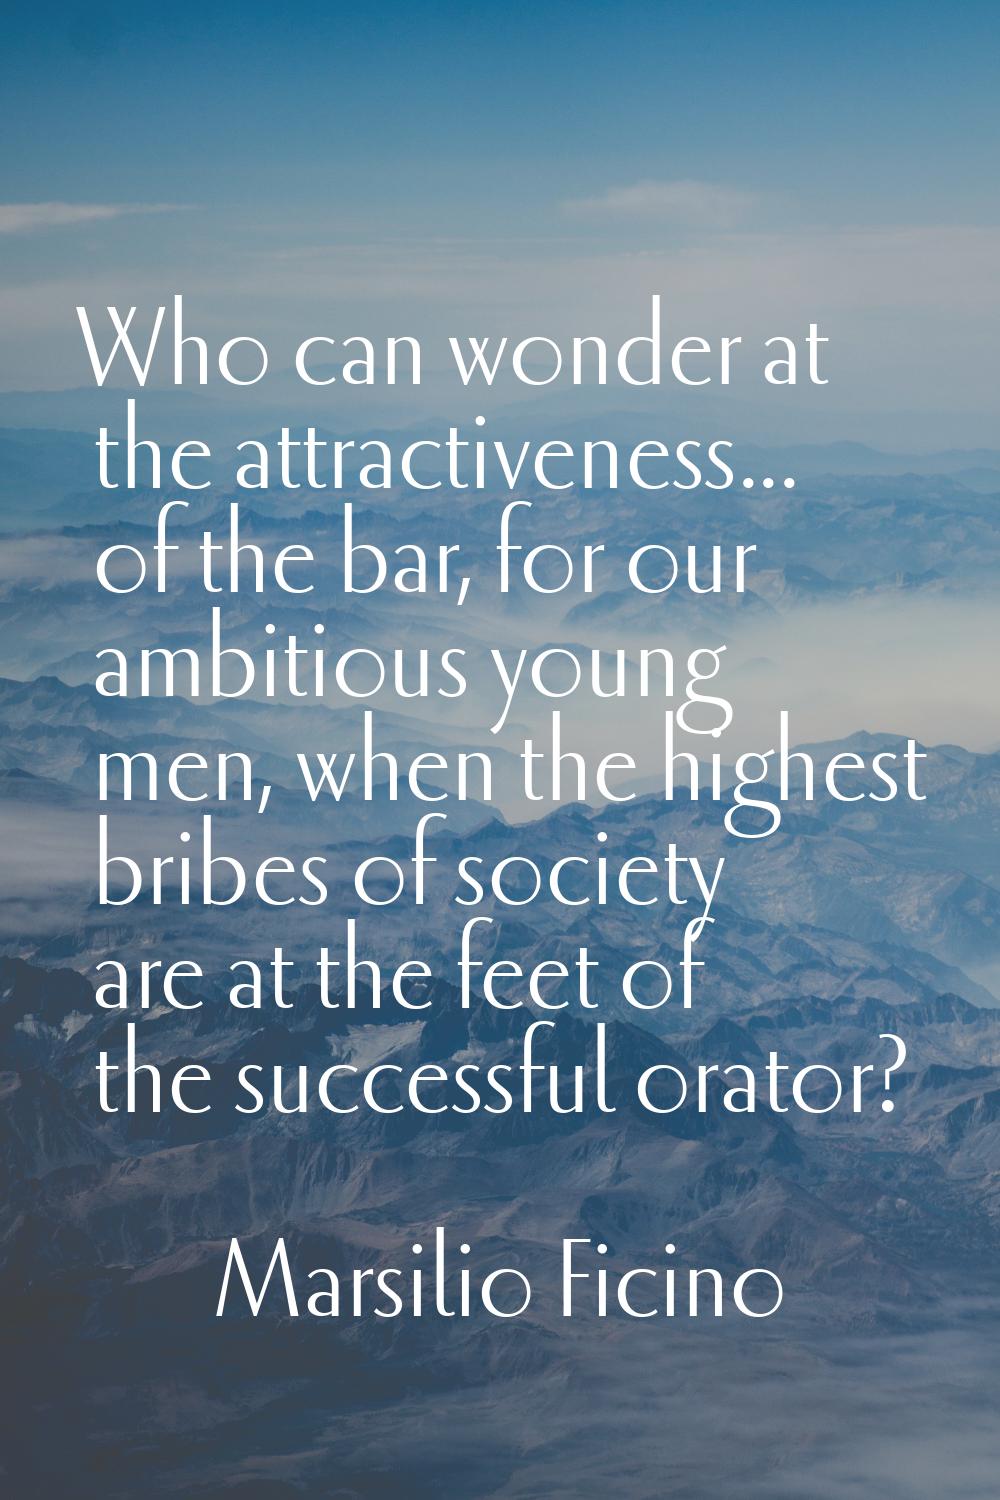 Who can wonder at the attractiveness... of the bar, for our ambitious young men, when the highest b